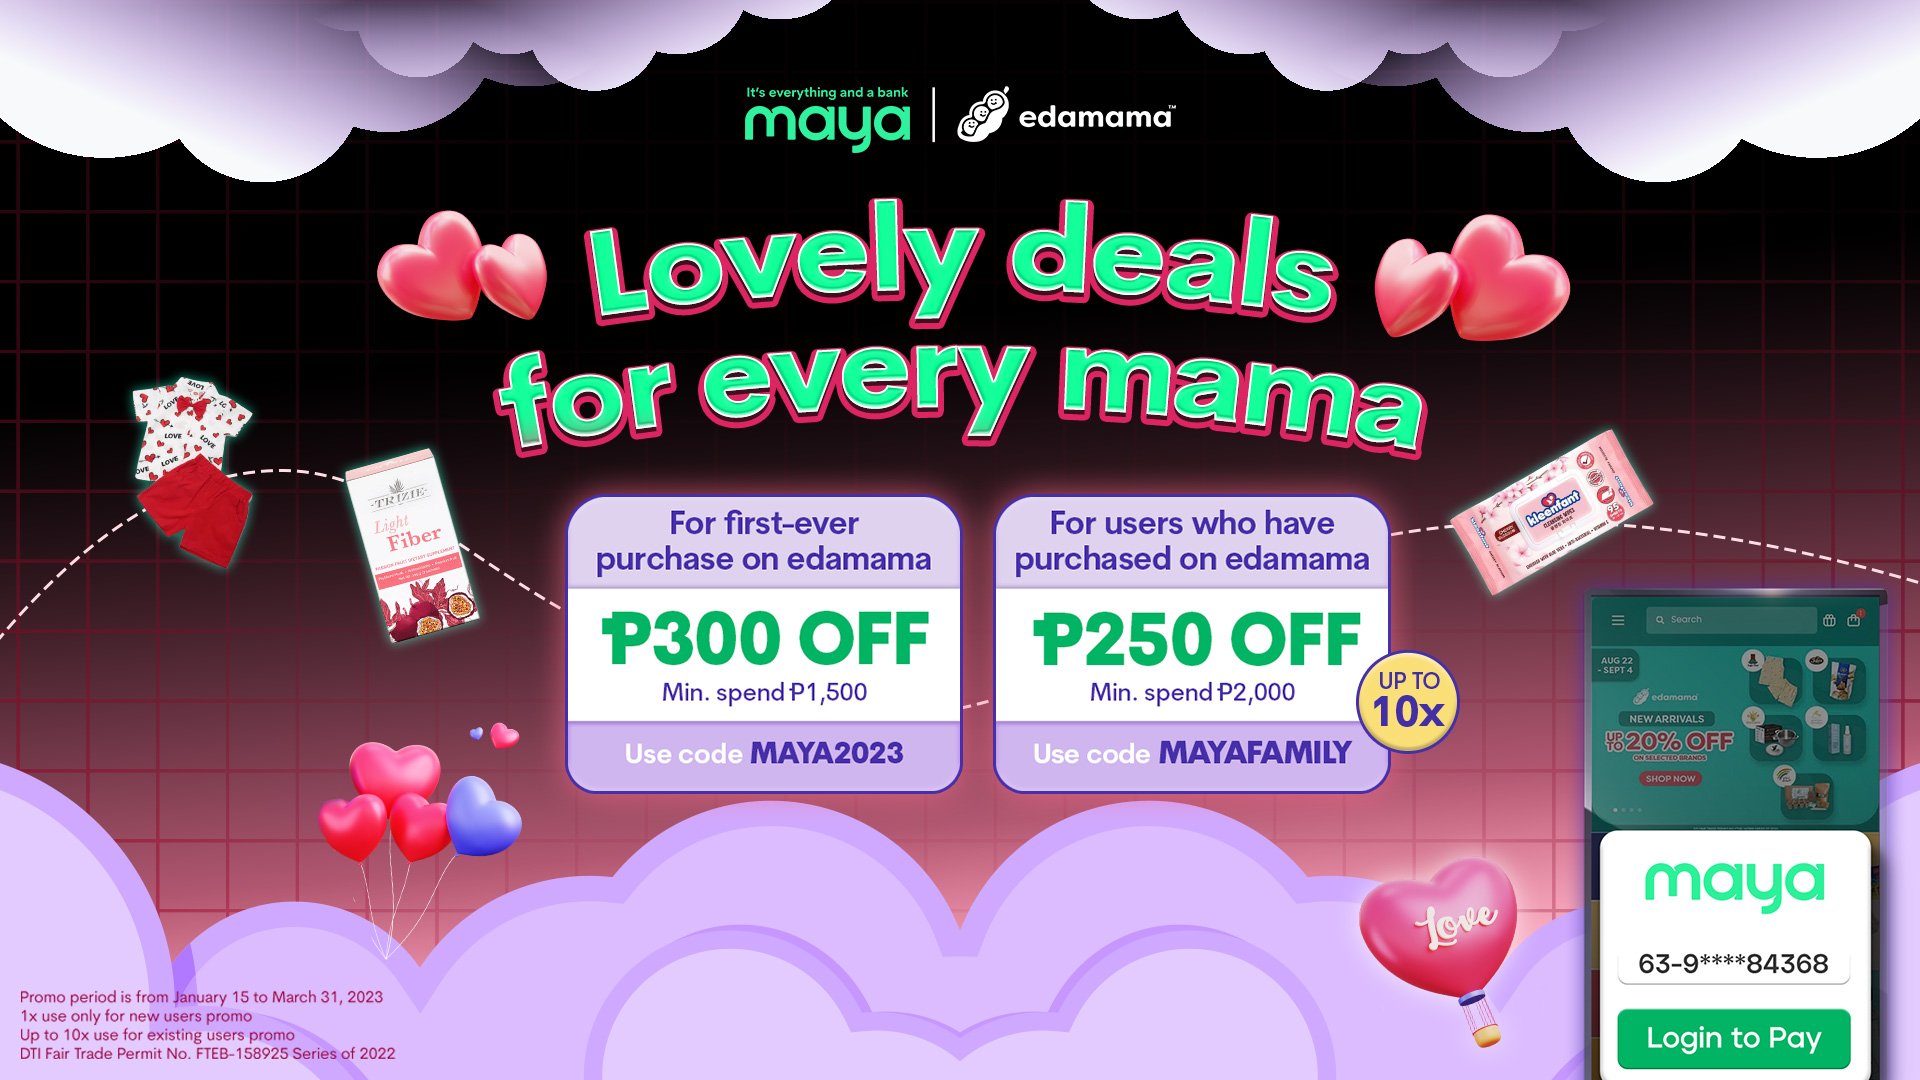 Get up to P2,800 OFF on edamama when you pay with Maya!